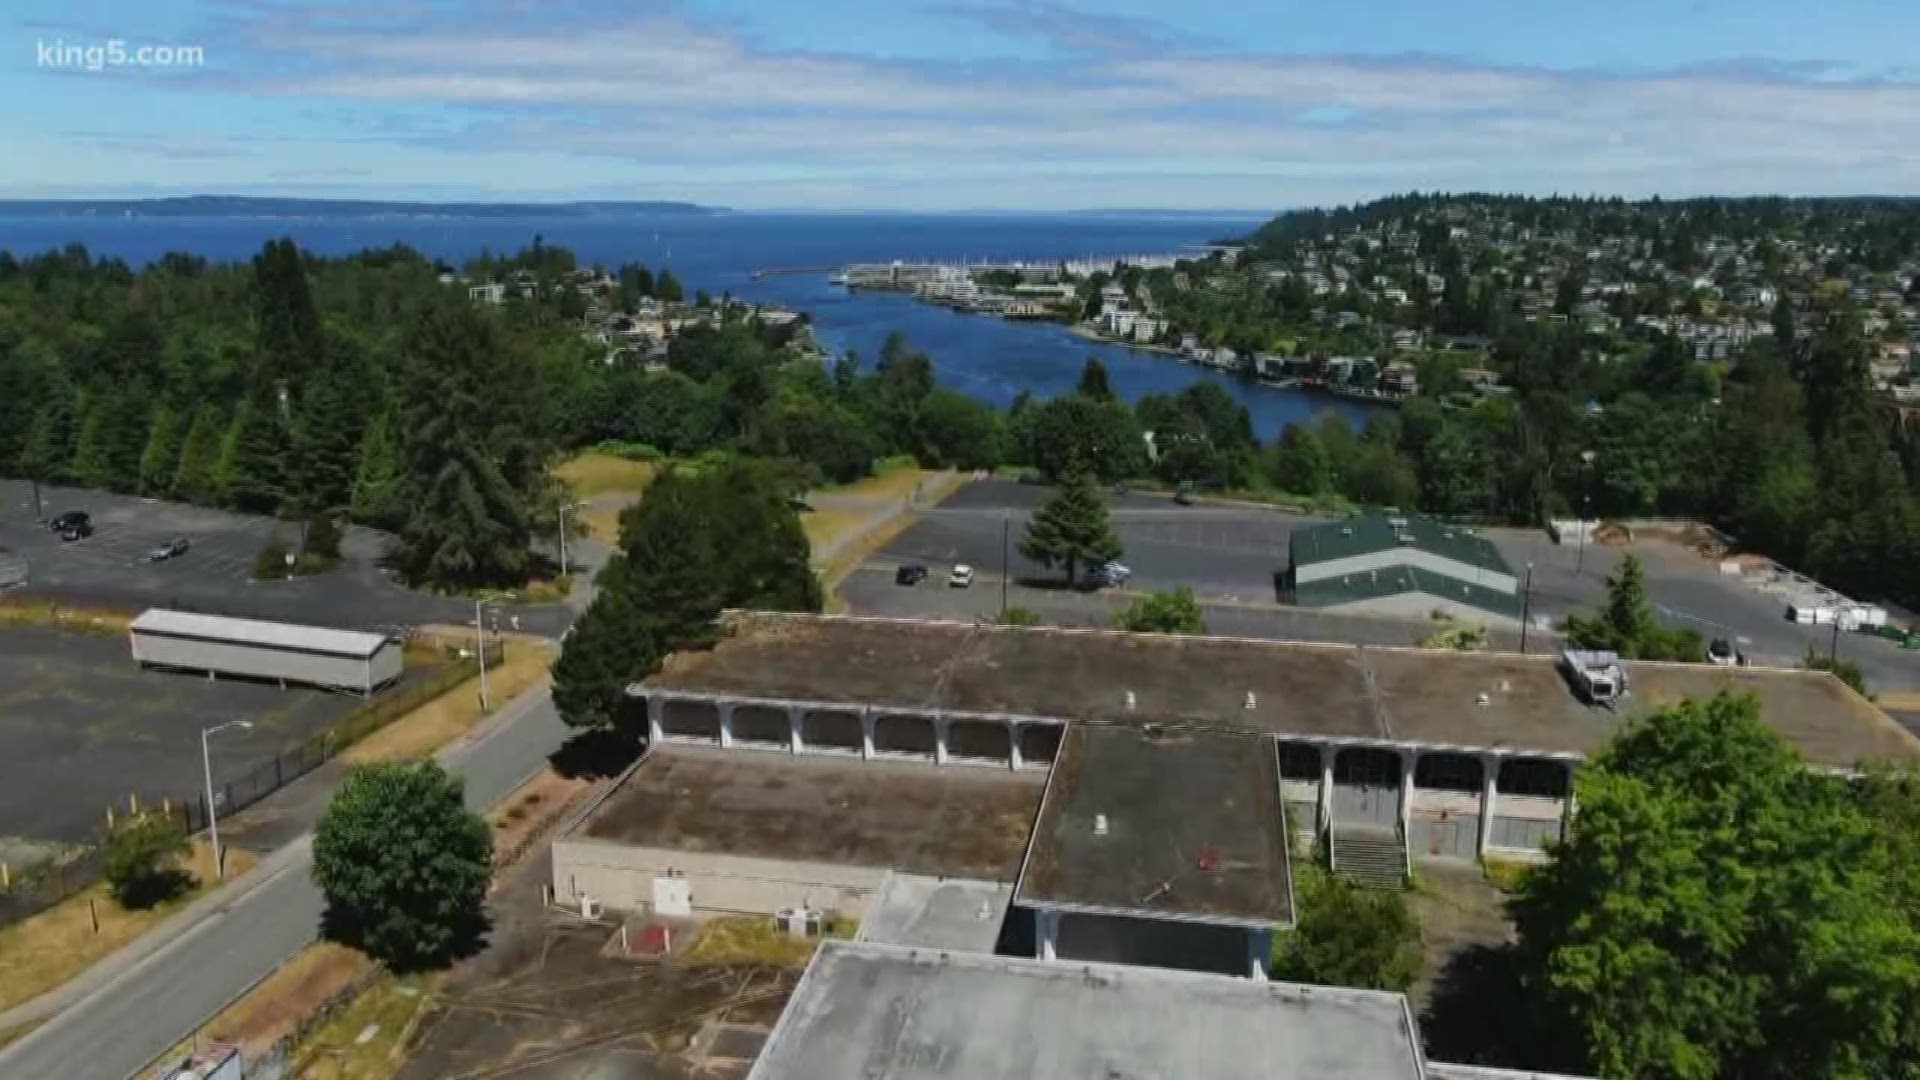 The Seattle City Council approved a plan to develop Fort Lawton into 237 units of affordable housing, athletic fields, and parks. KING 5's Chris Daniels reports.